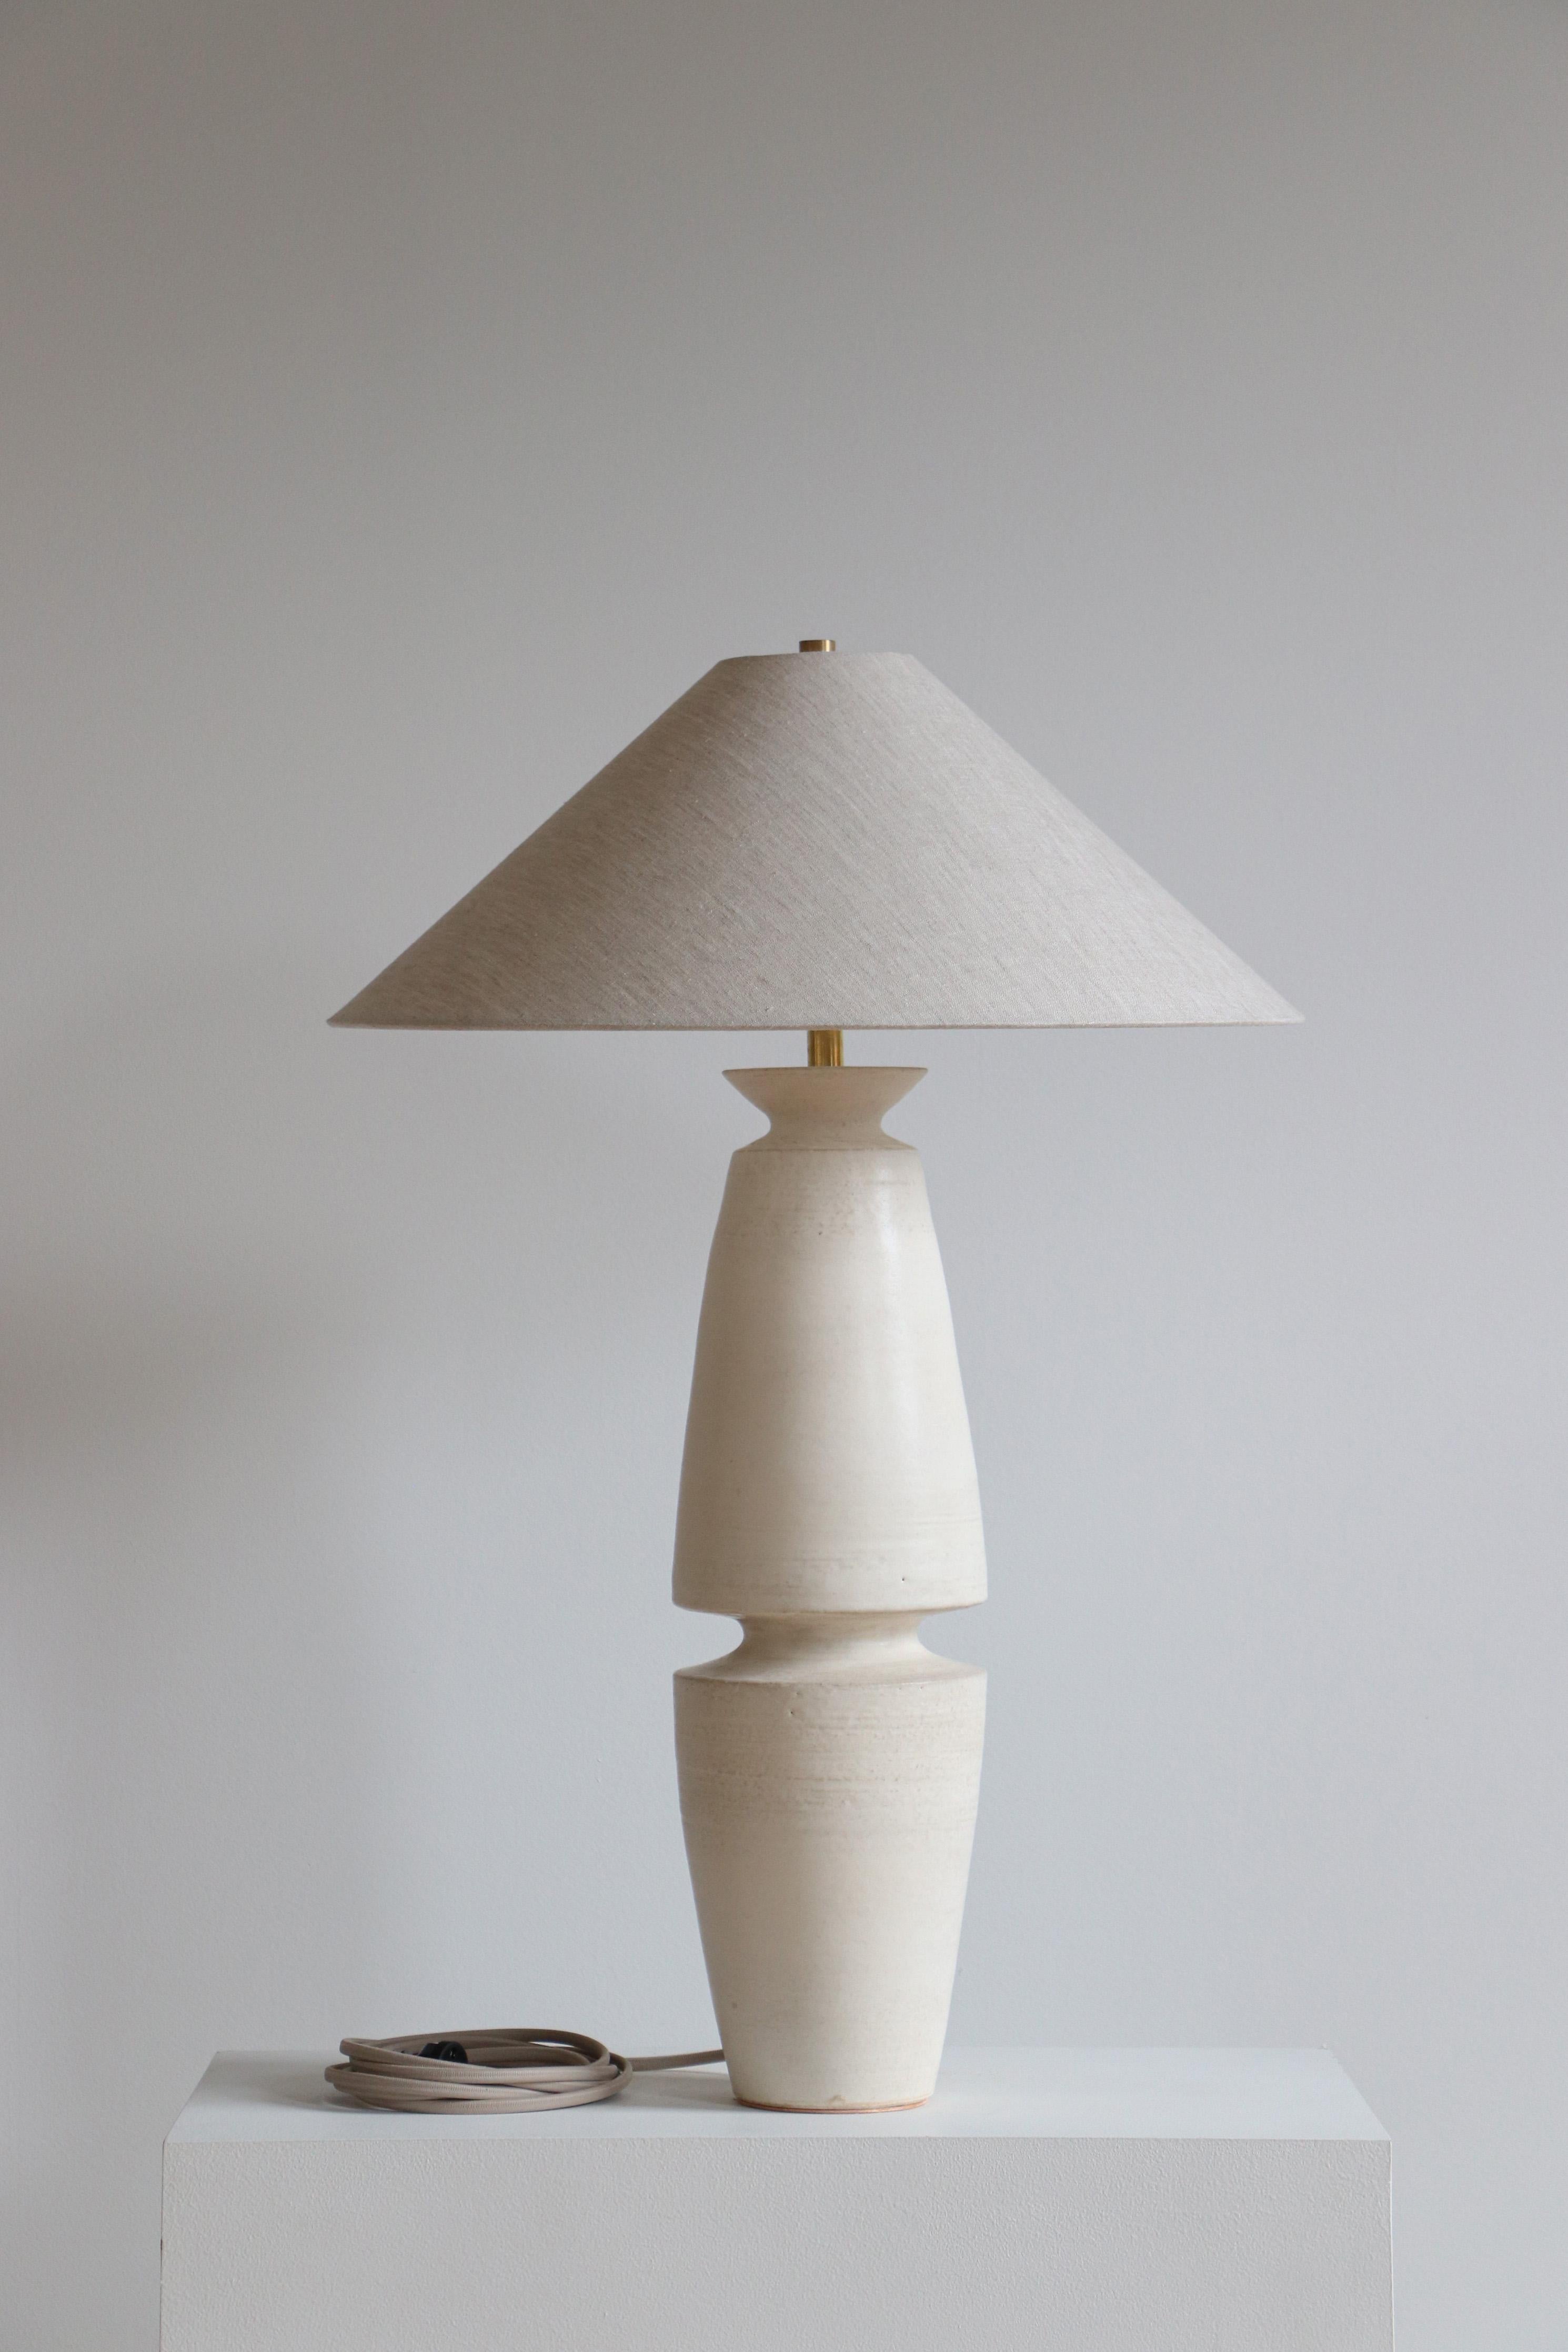 Stone Serena Table Lamp by Danny Kaplan Studio
Dimensions: ⌀ 51 x H 71 cm
Materials: Glazed Ceramic, Unfinished Brass, Linen

This item is handmade, and may exhibit variability within the same piece. We do our best to maintain a consistent product,